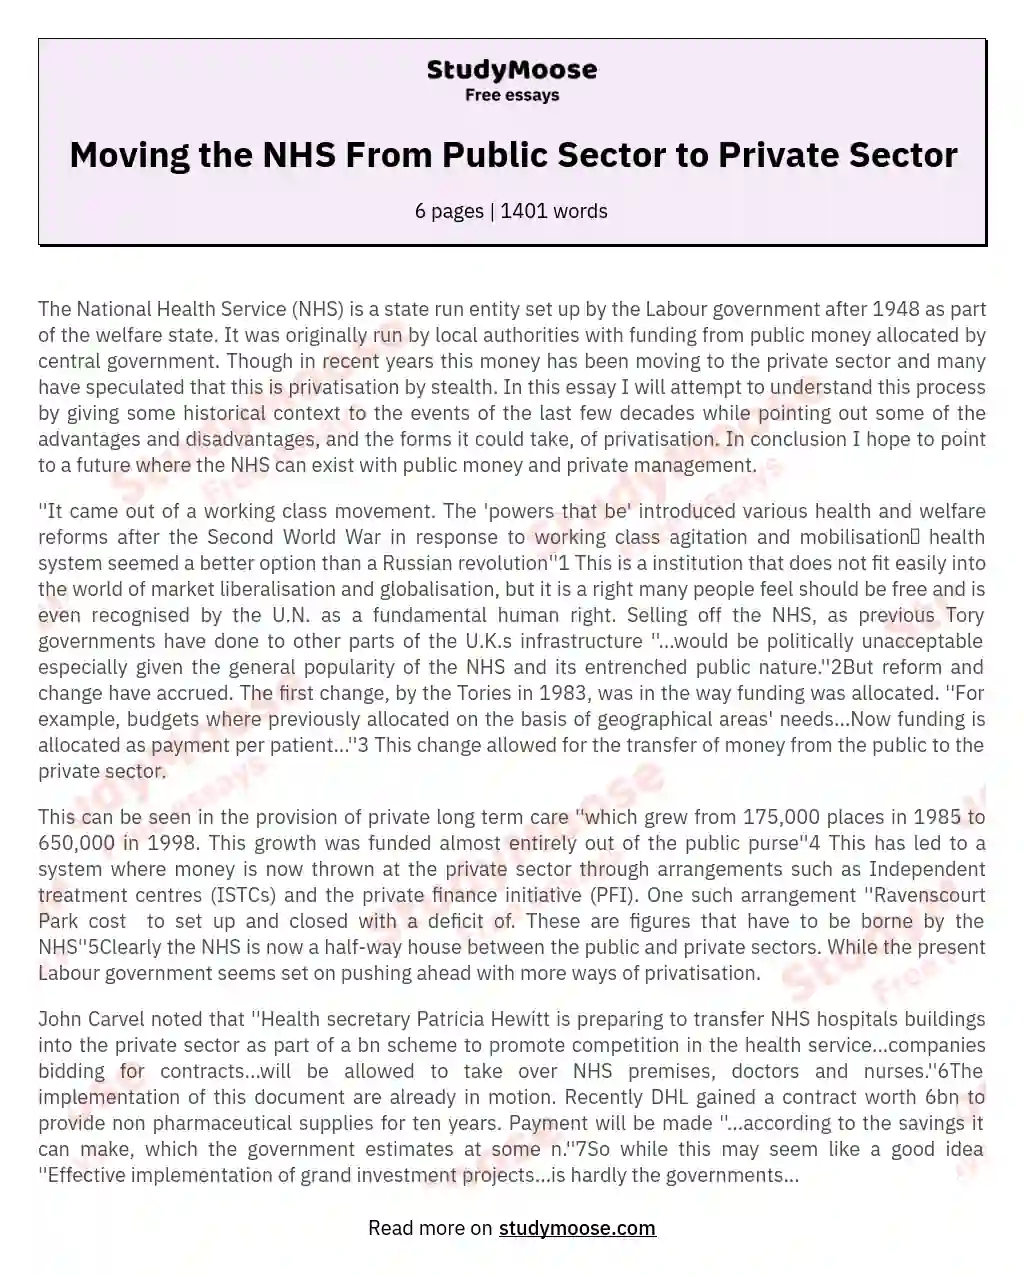 Moving the NHS From Public Sector to Private Sector